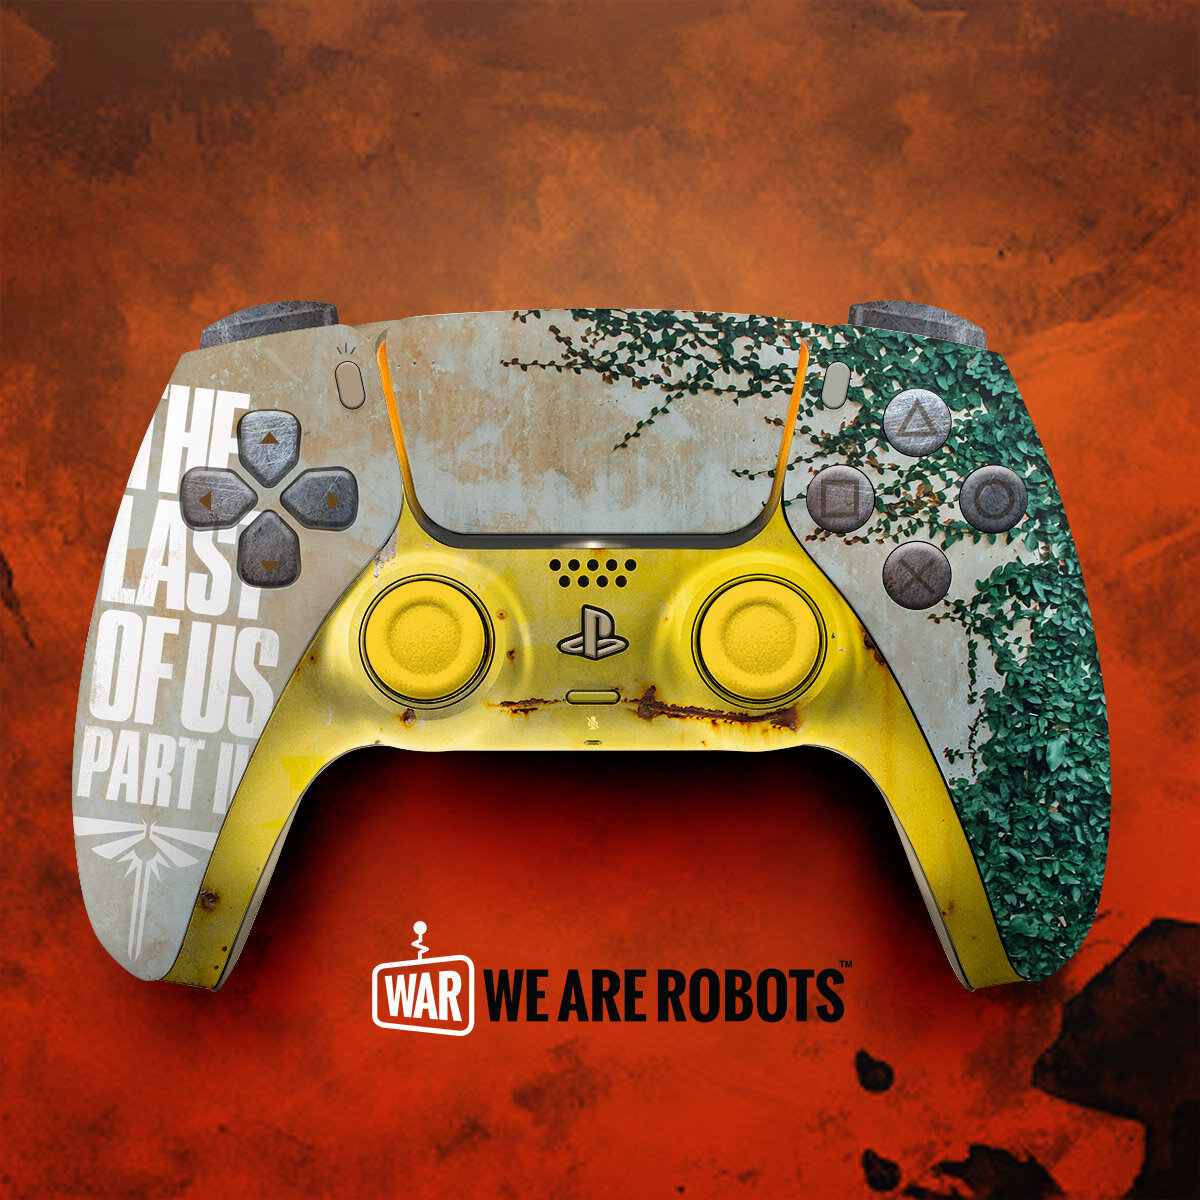 We Are Robots - The Last of Us Playstation 5 Controller